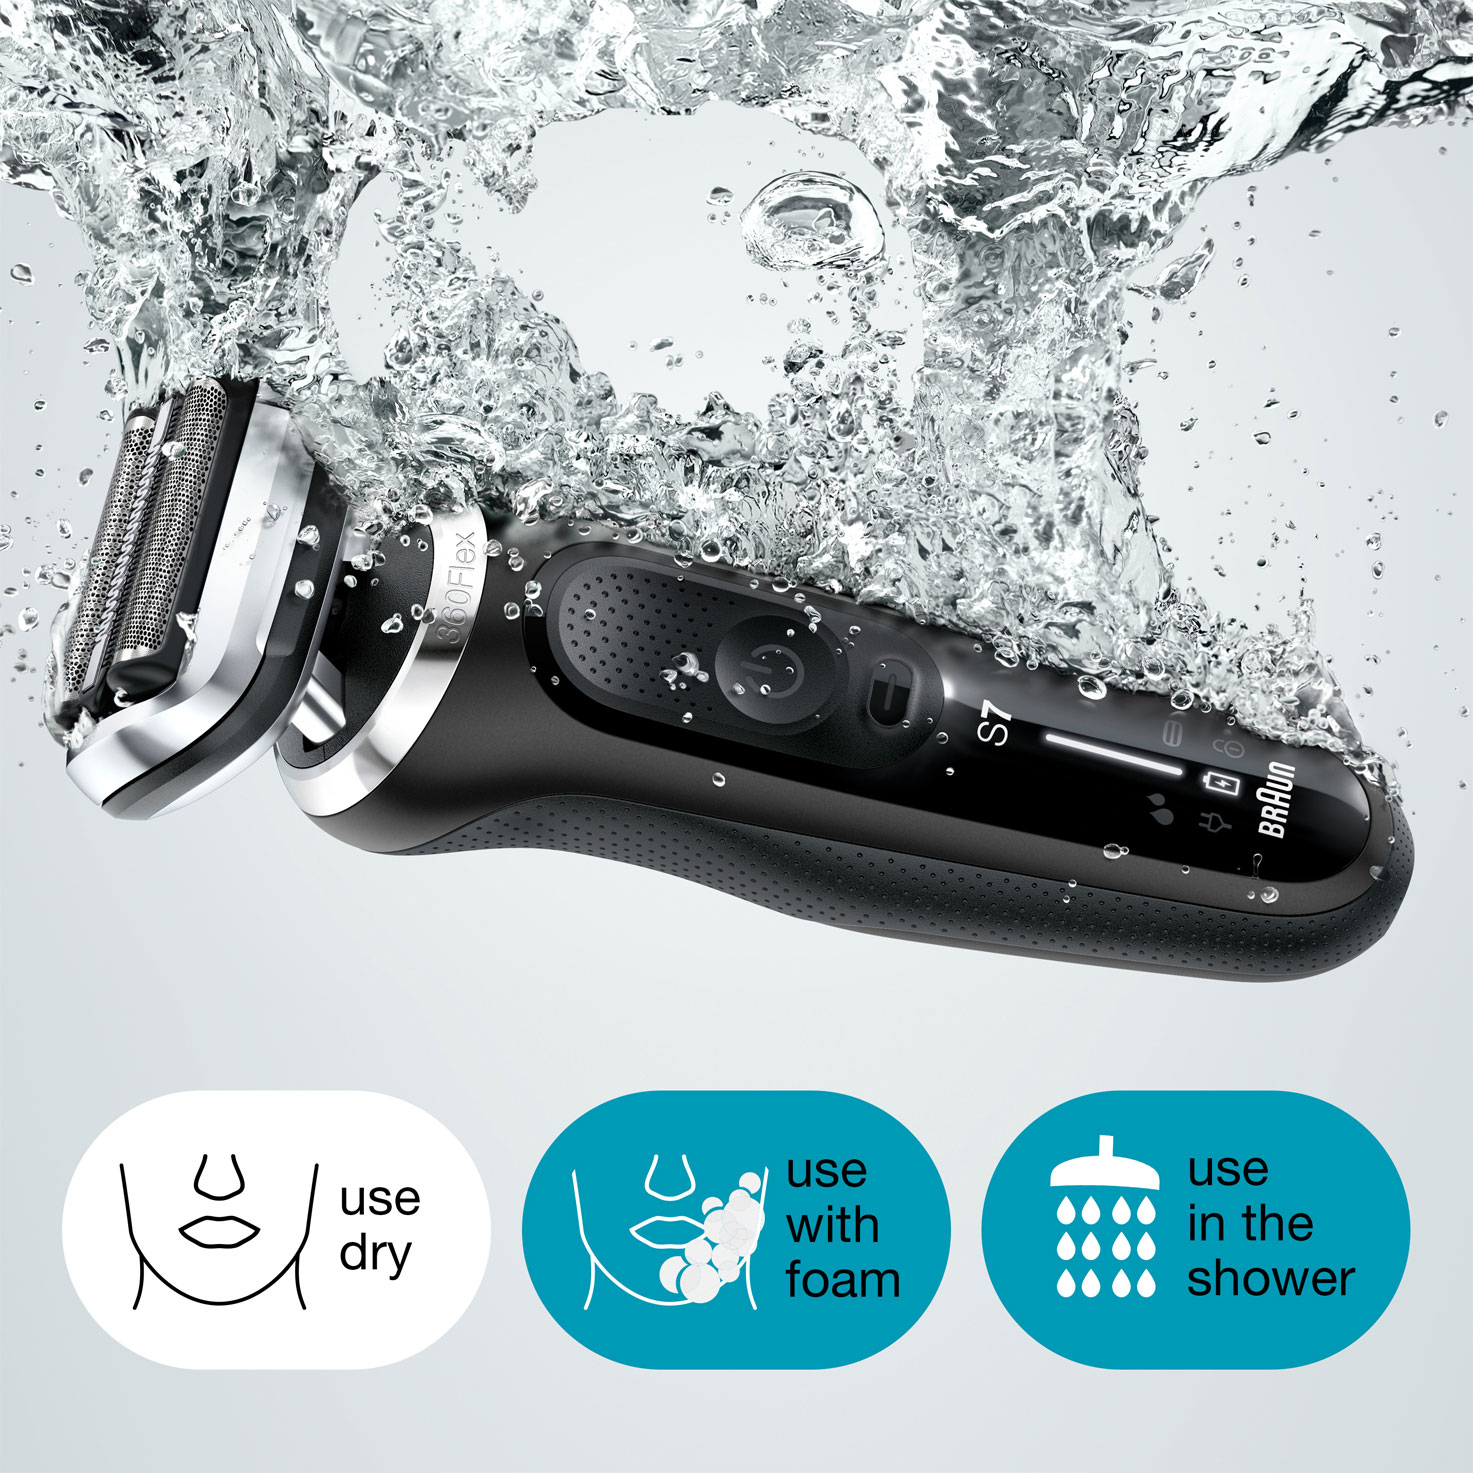 Series 7 71-N1000s Wet & Dry shaver with travel case,